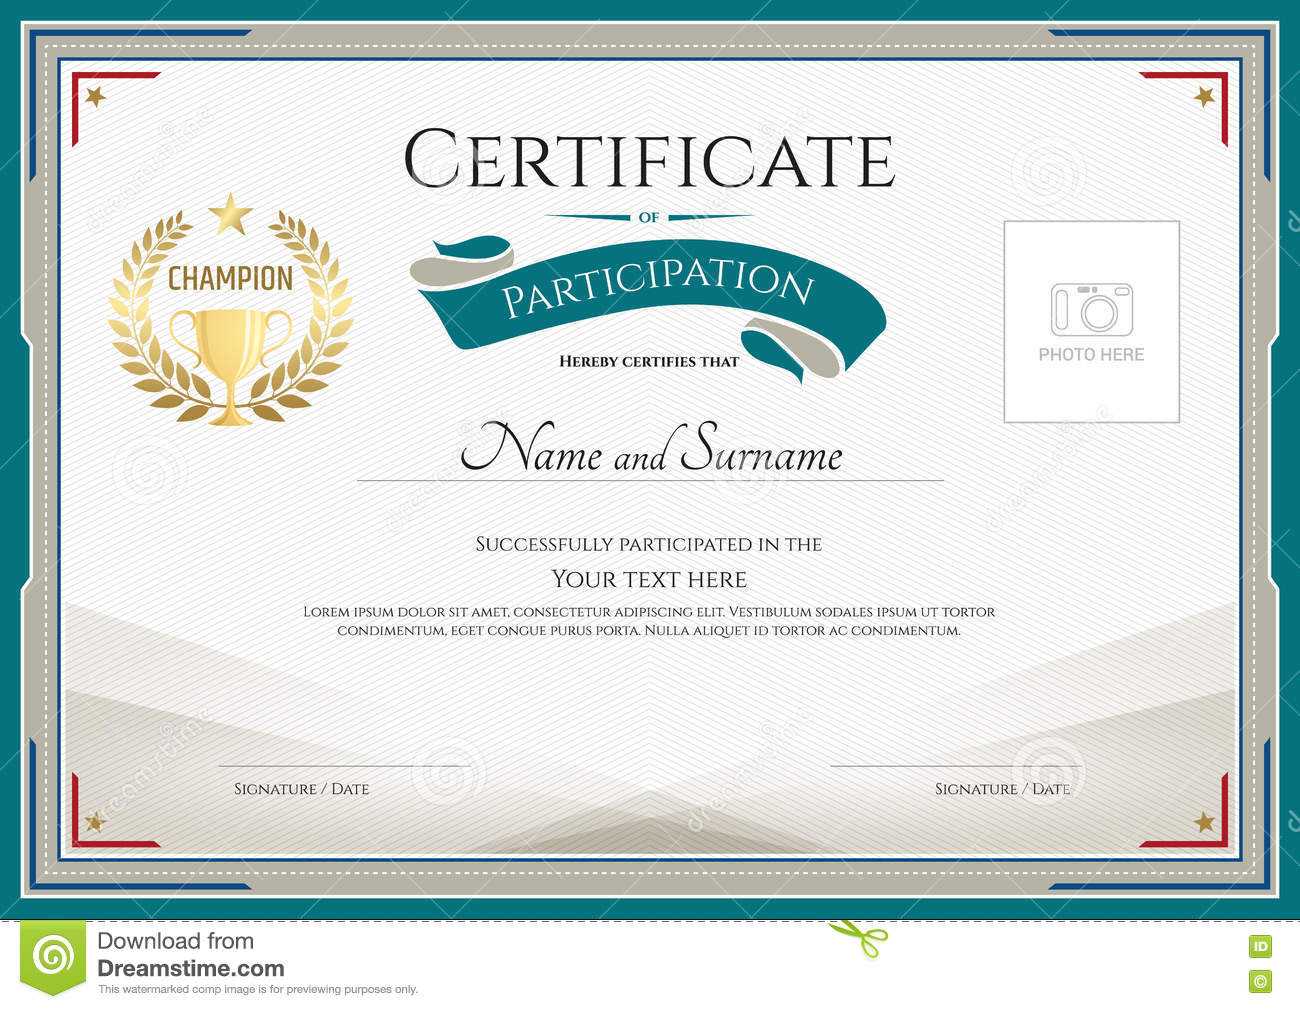 Certificate Of Participation Template With Green Broder With Participation Certificate Templates Free Download